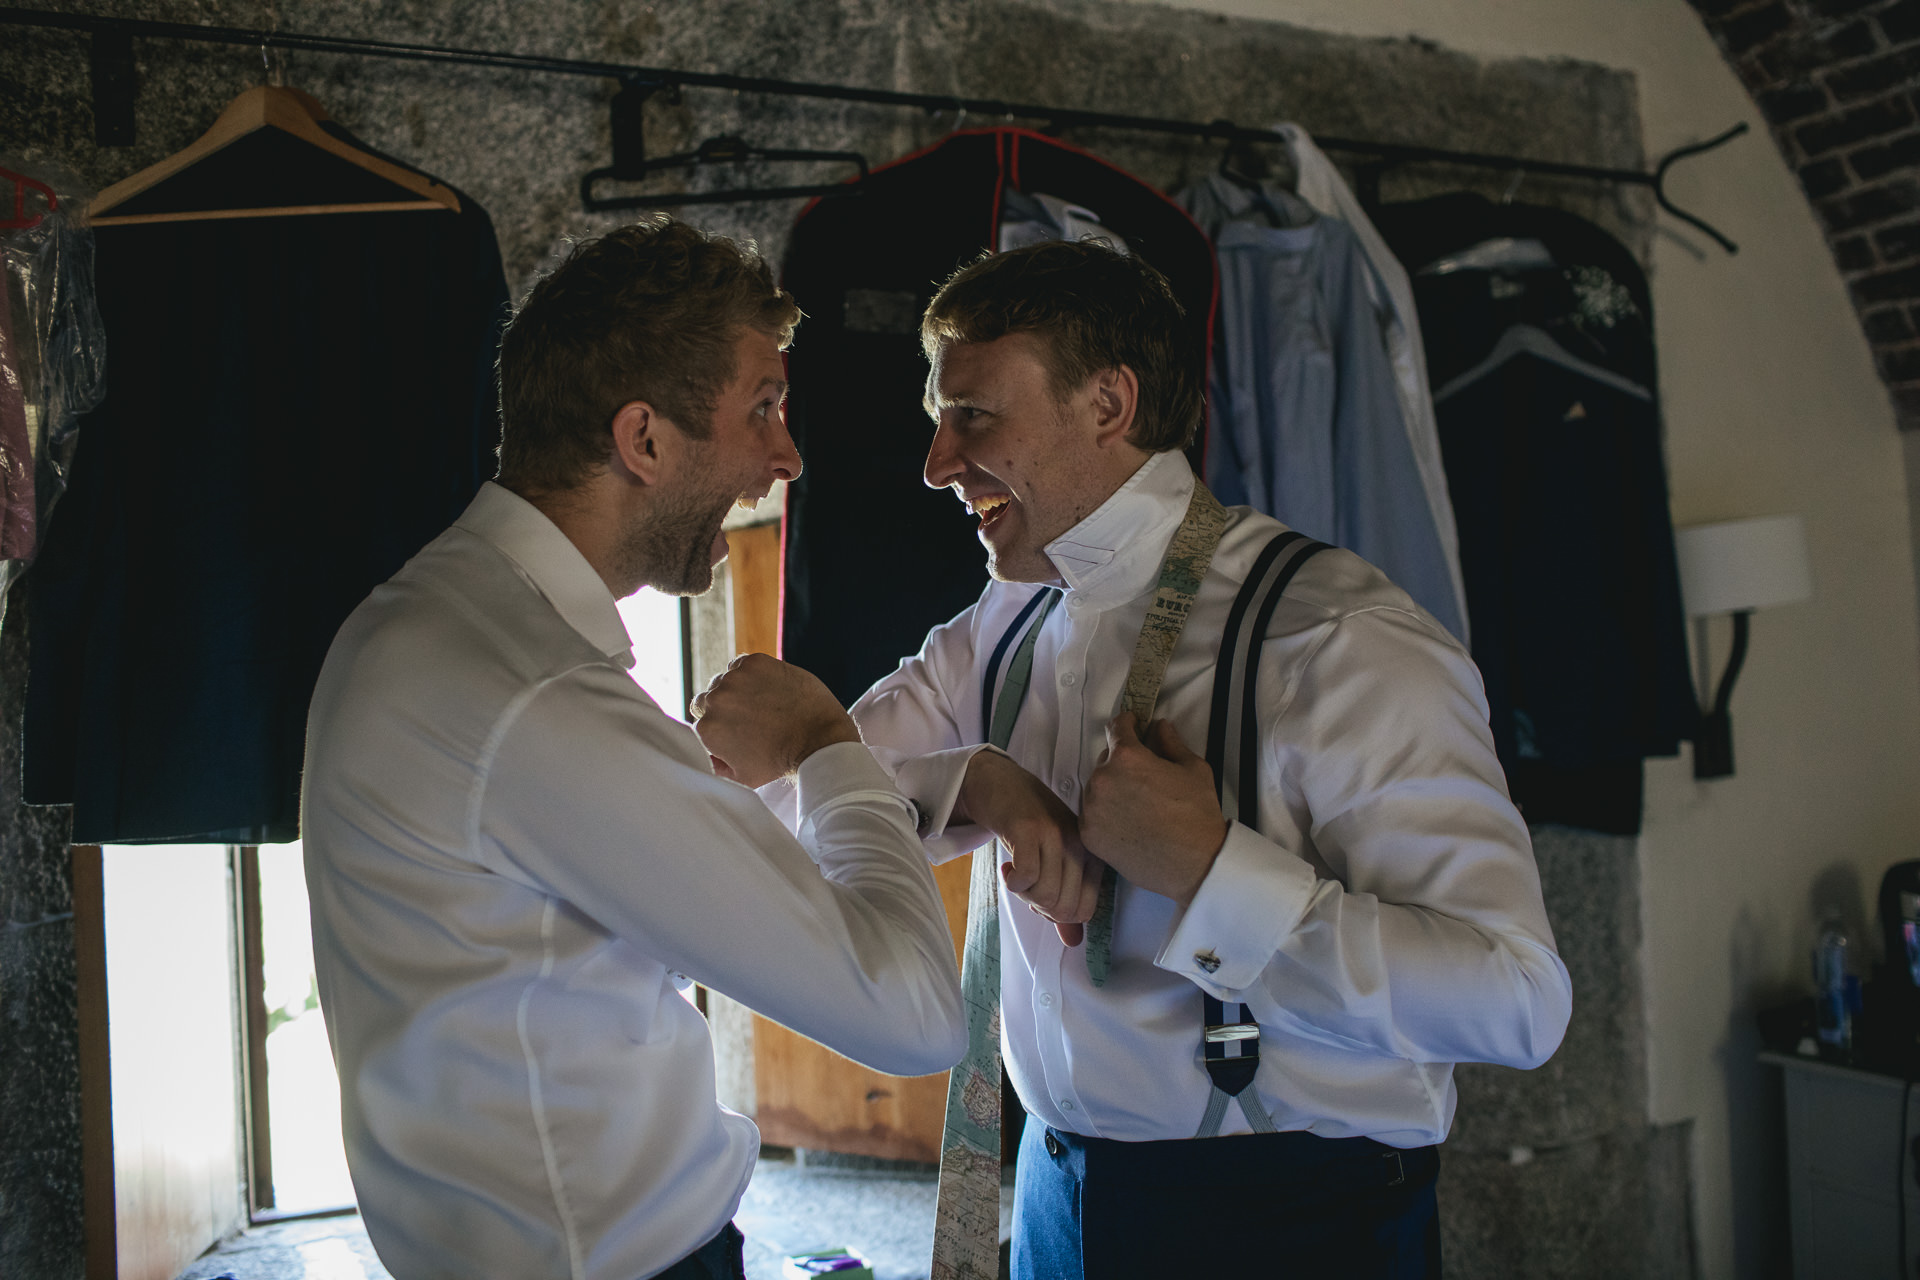 Groom getting dressed into shirt and braces